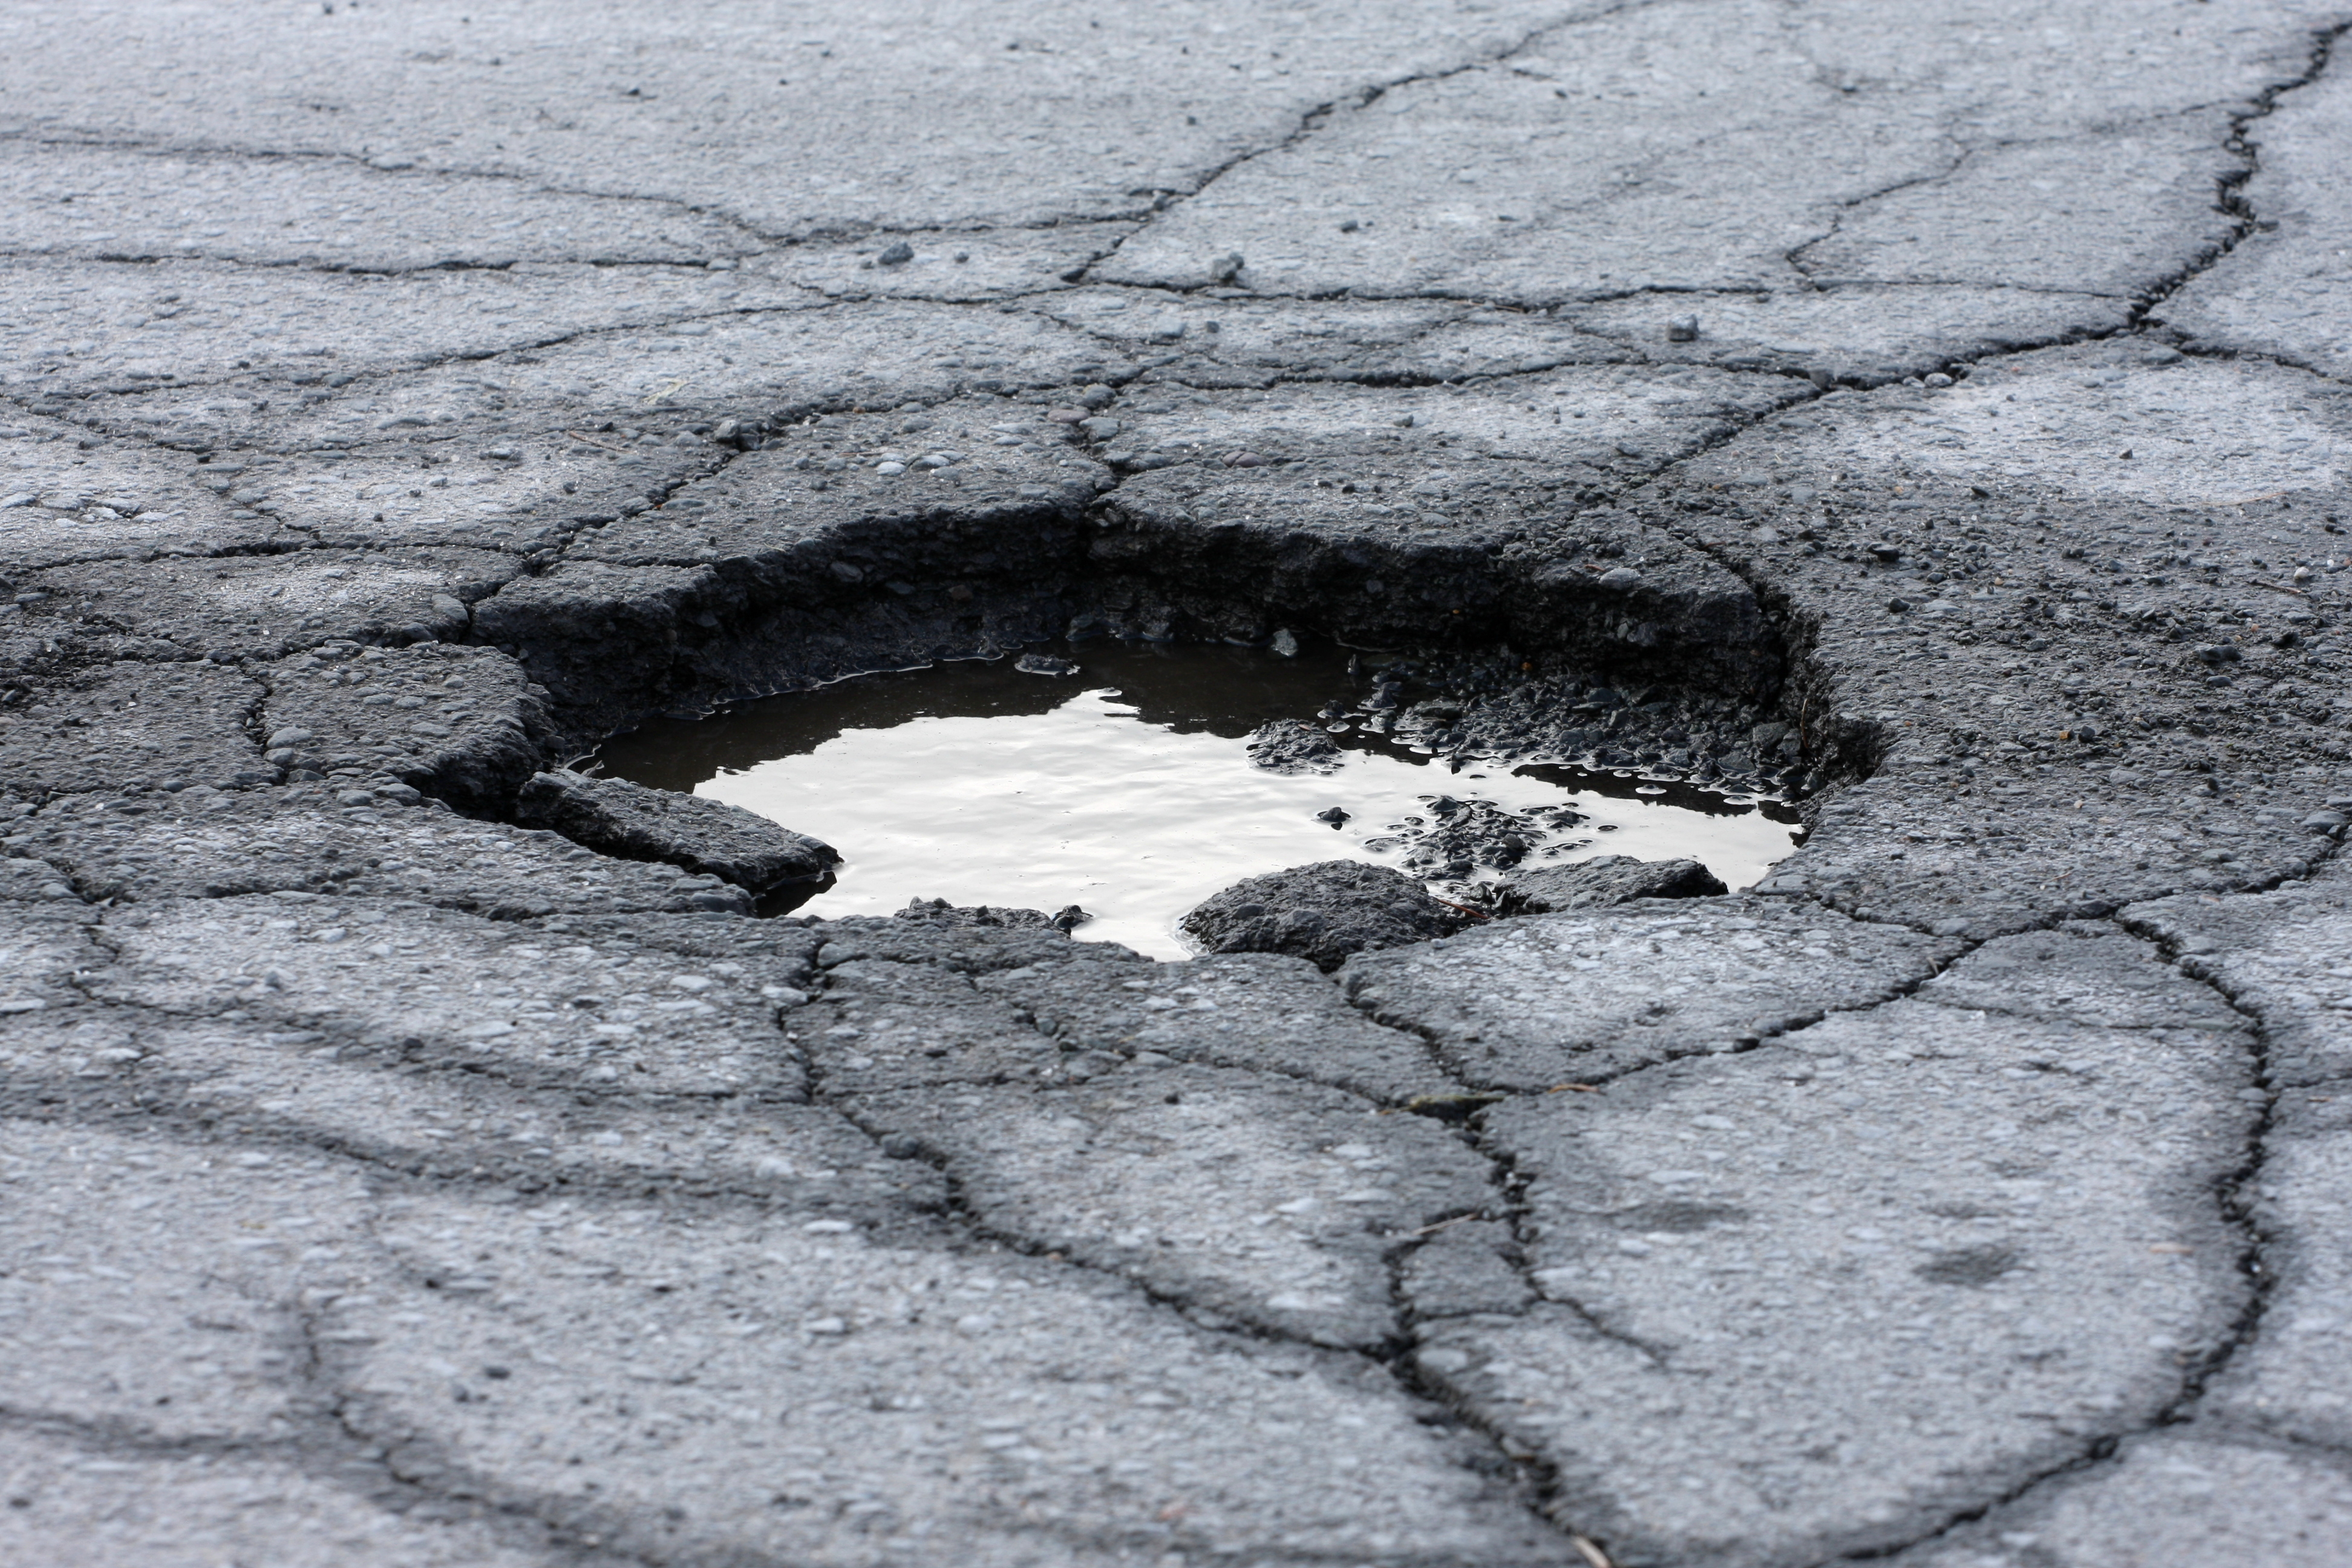 The Centre for Economics and Business Research has told of the whopping damage that potholes are doing to the UK economy